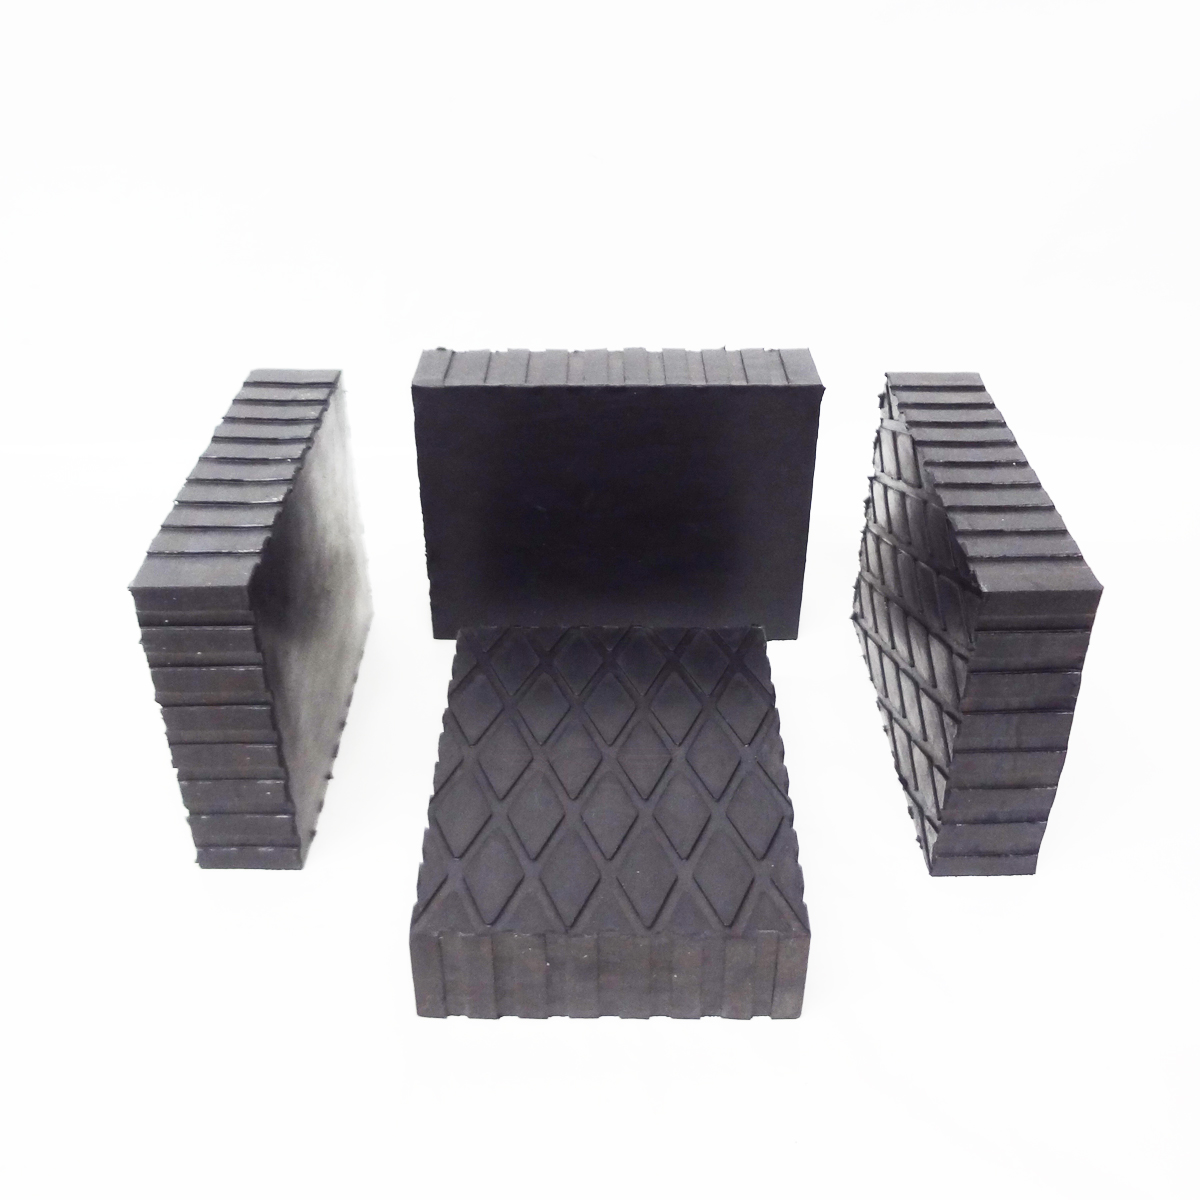 63mm x 23mm rubber pad rubber block hydraulic ramp jack rubber pads